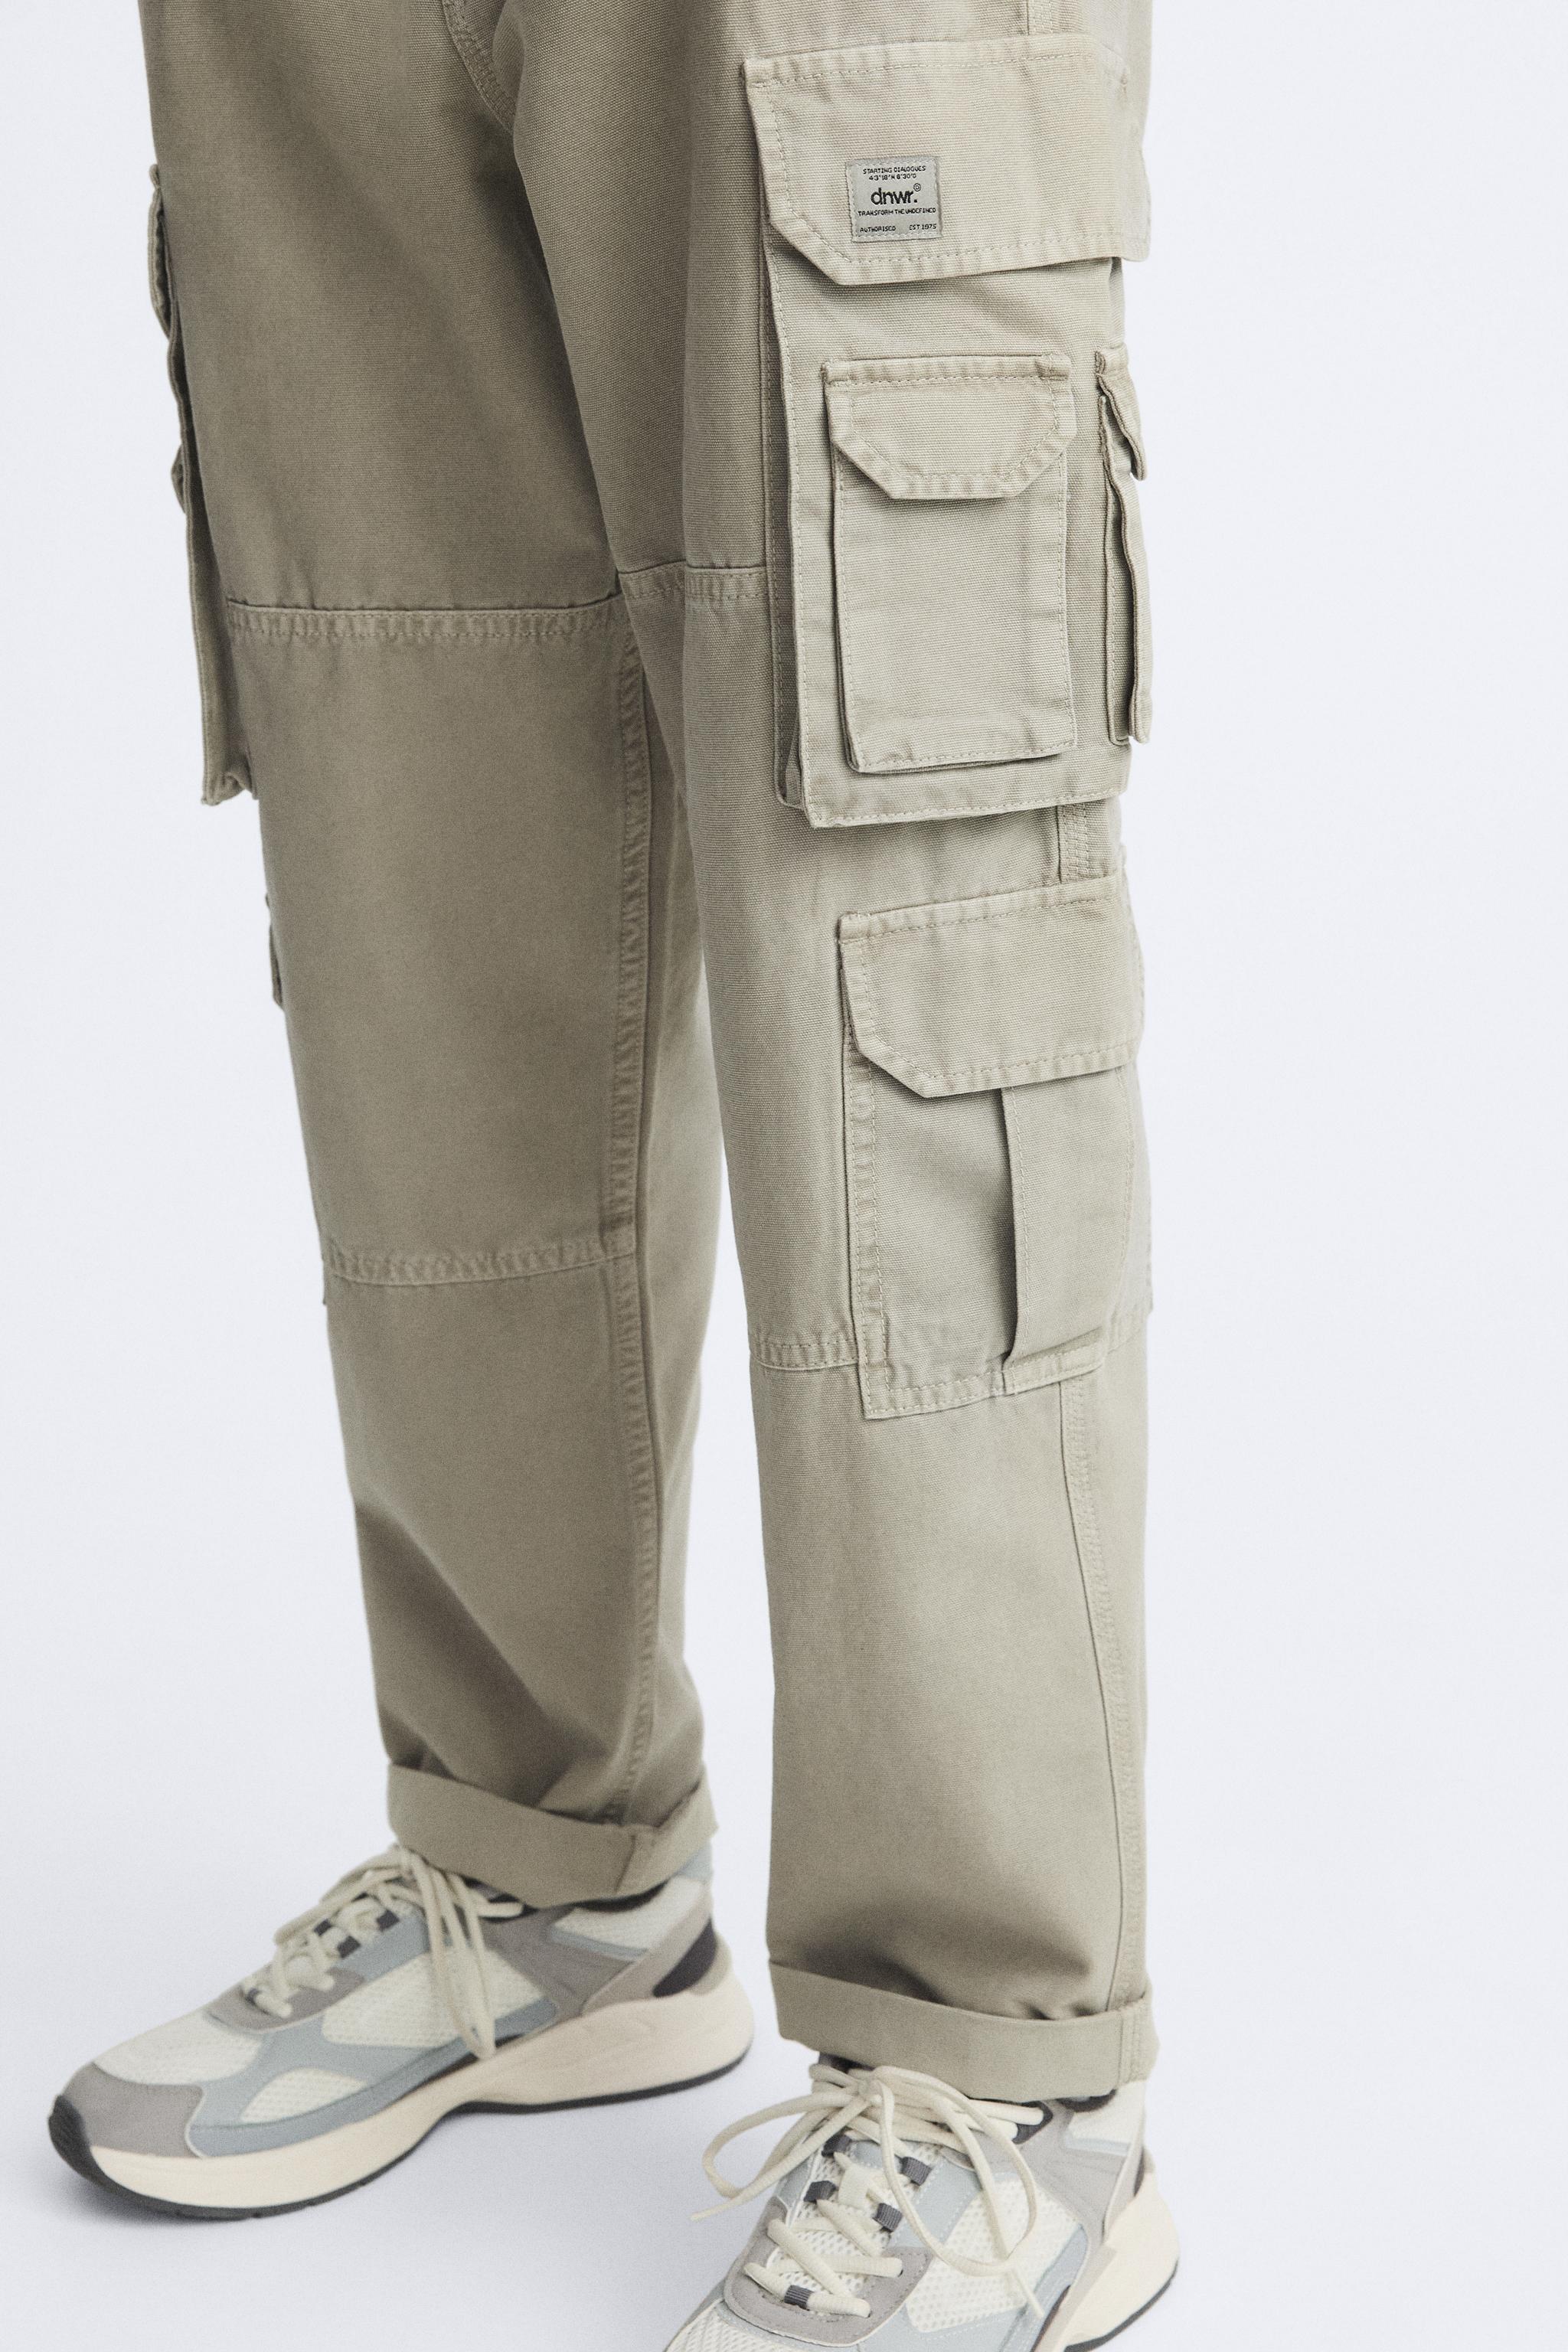 ZARA RELAXED FIT MENS CARGO PANTS size 30